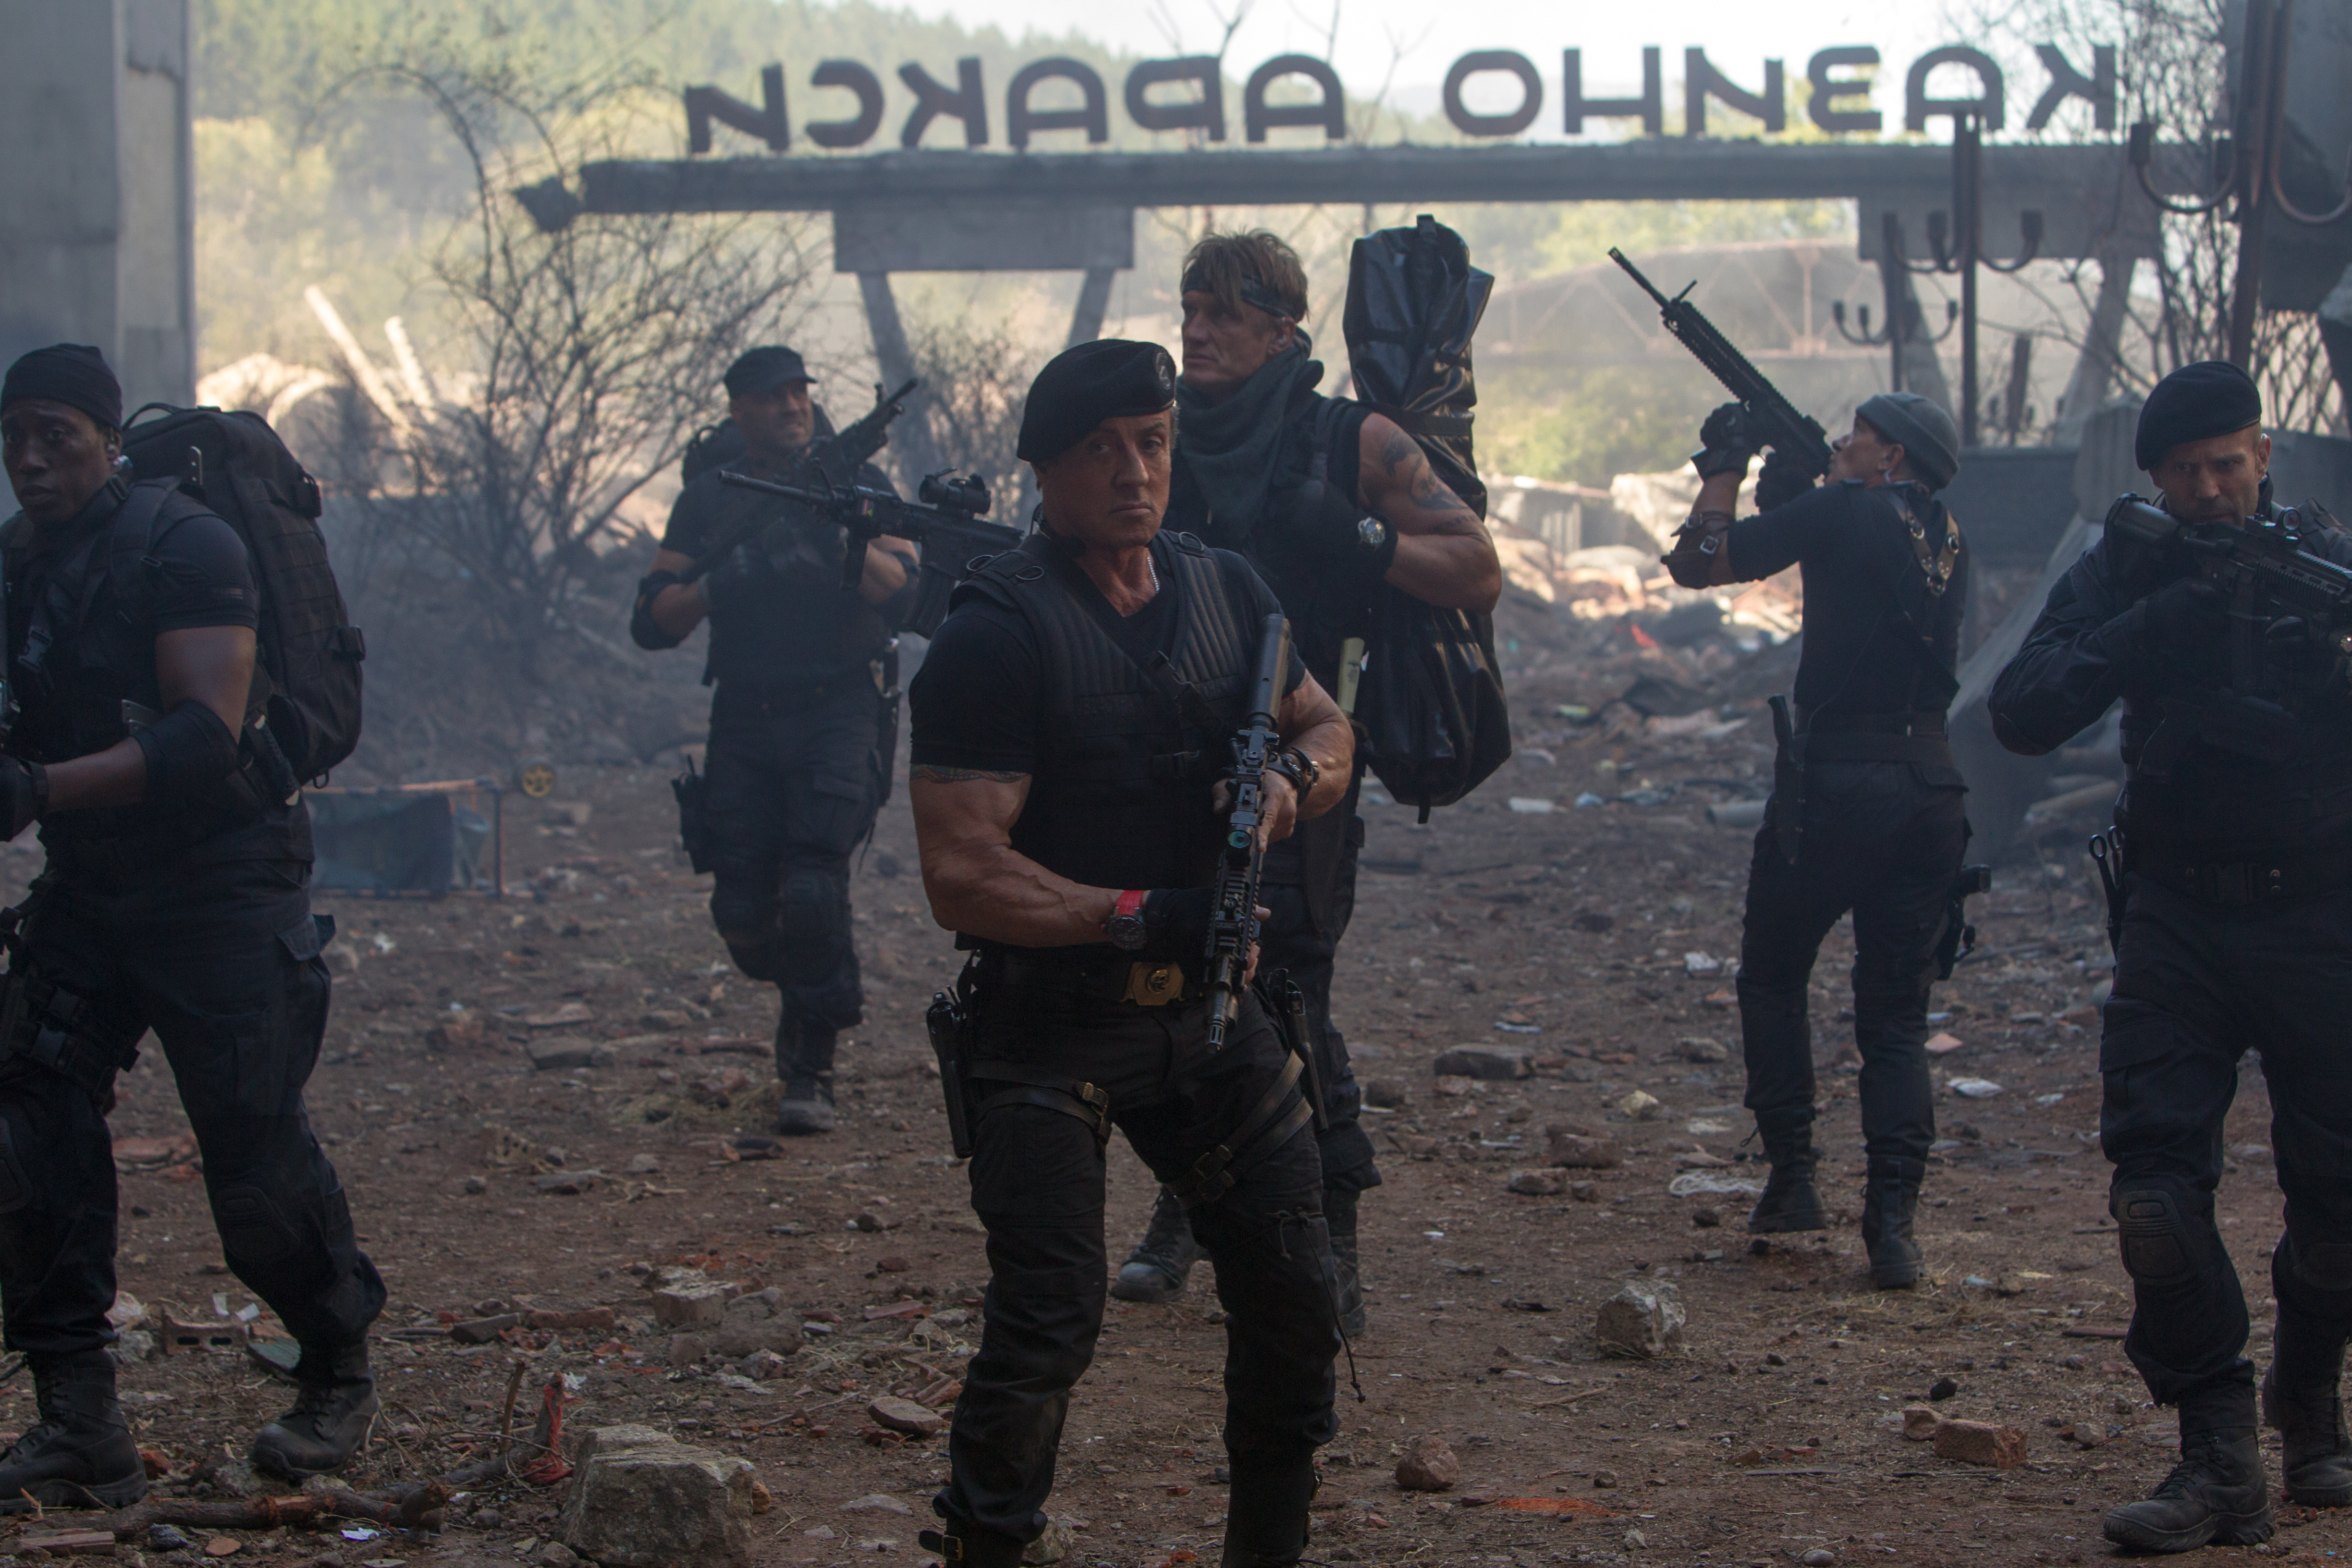 movie, the expendables 3, antonio banderas, barney ross, doc (the expendables), dolph lundgren, galgo (the expendables), gunnar jensen, jason statham, lee christmas, randy couture, sylvester stallone, toll road, wesley snipes, the expendables Full HD